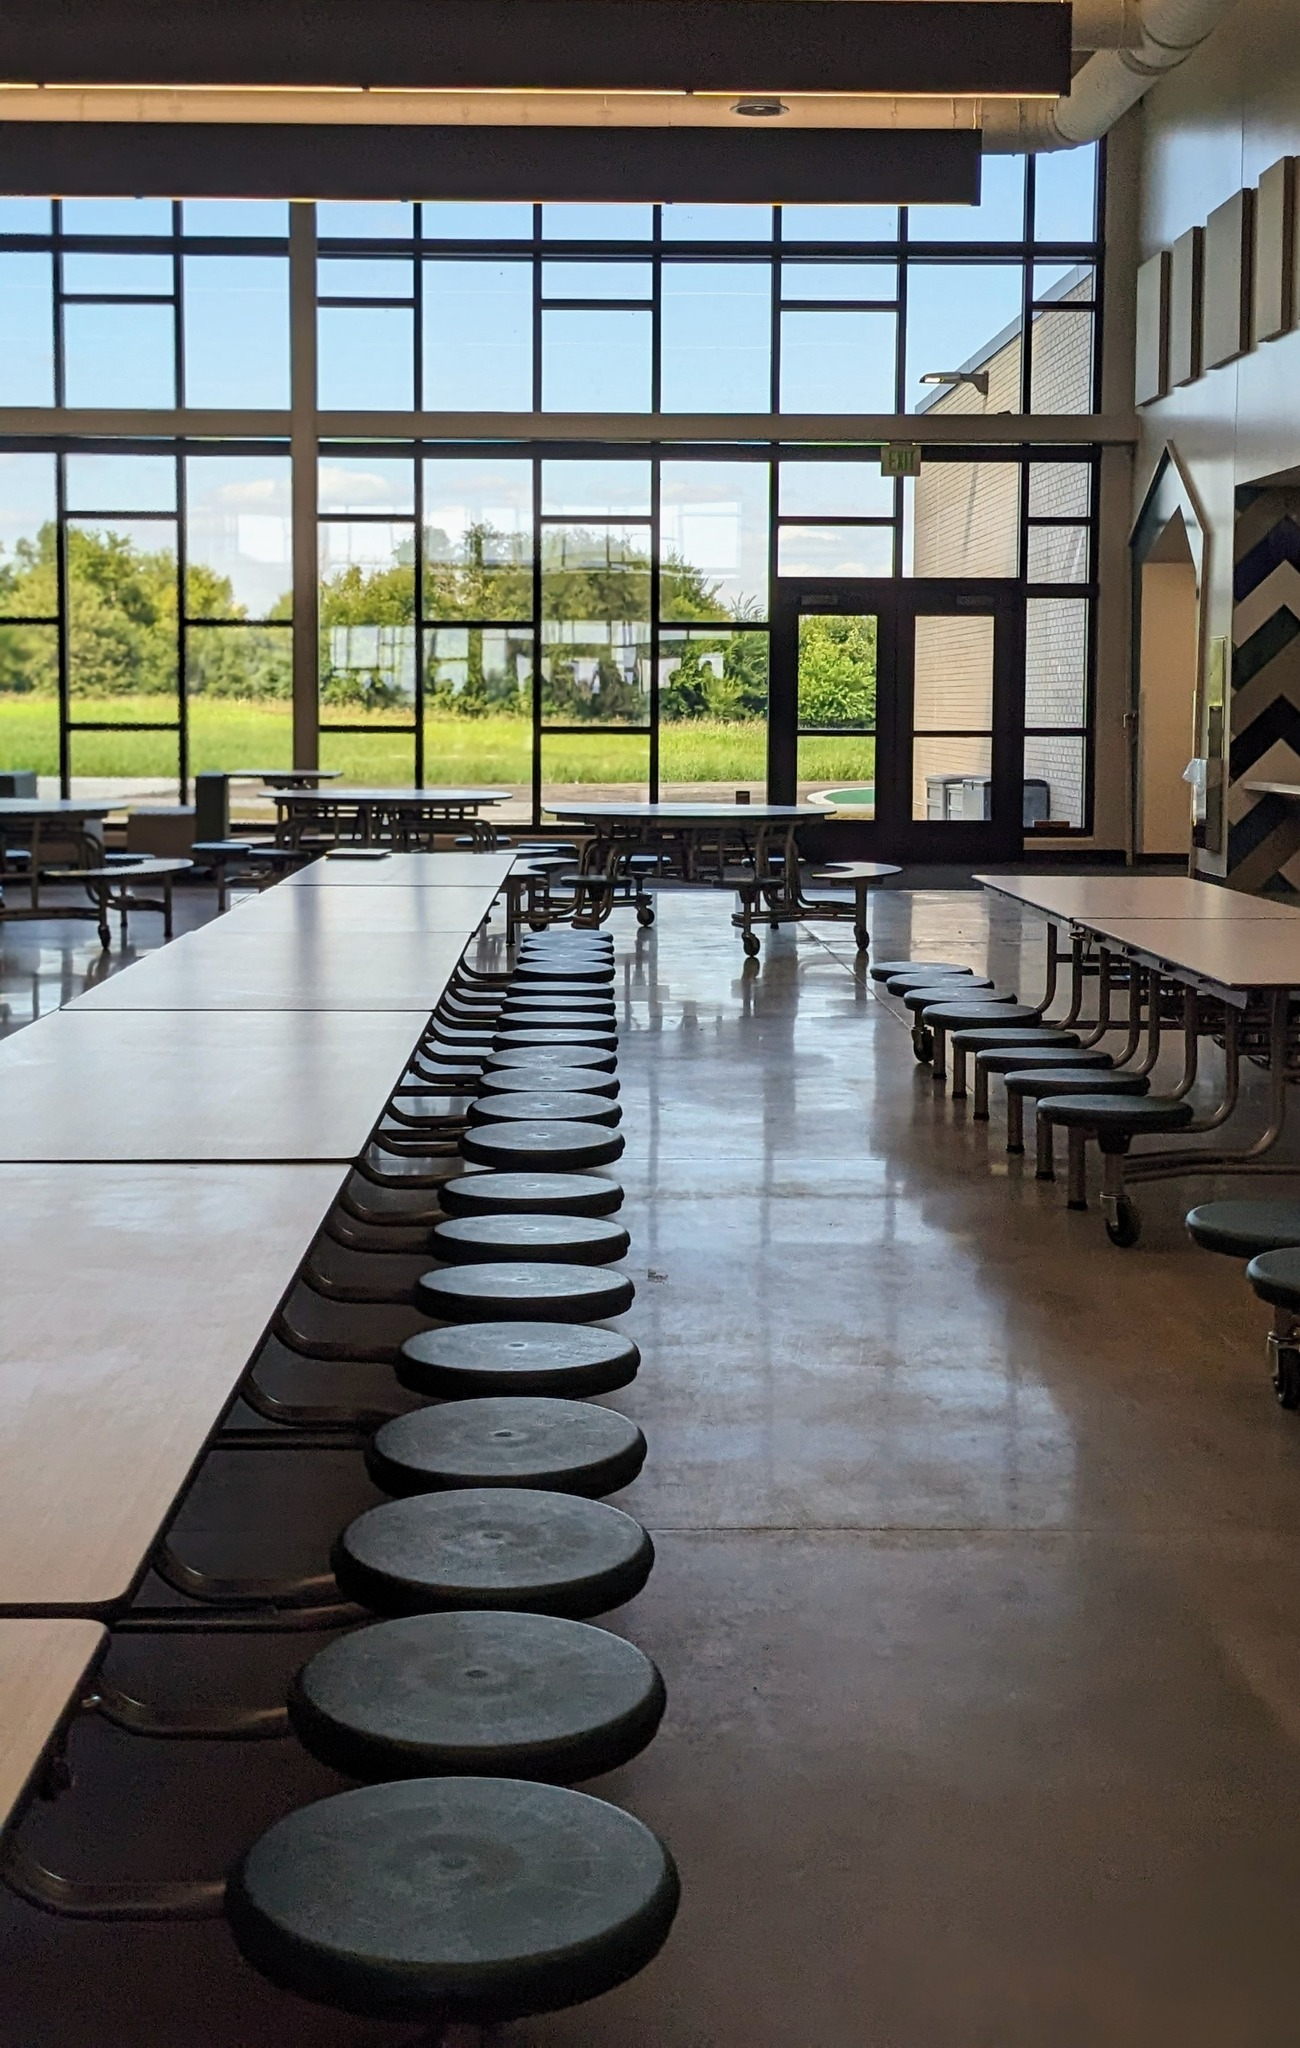 Boone CSD - Commons showing open light with all the windows and tables and stools